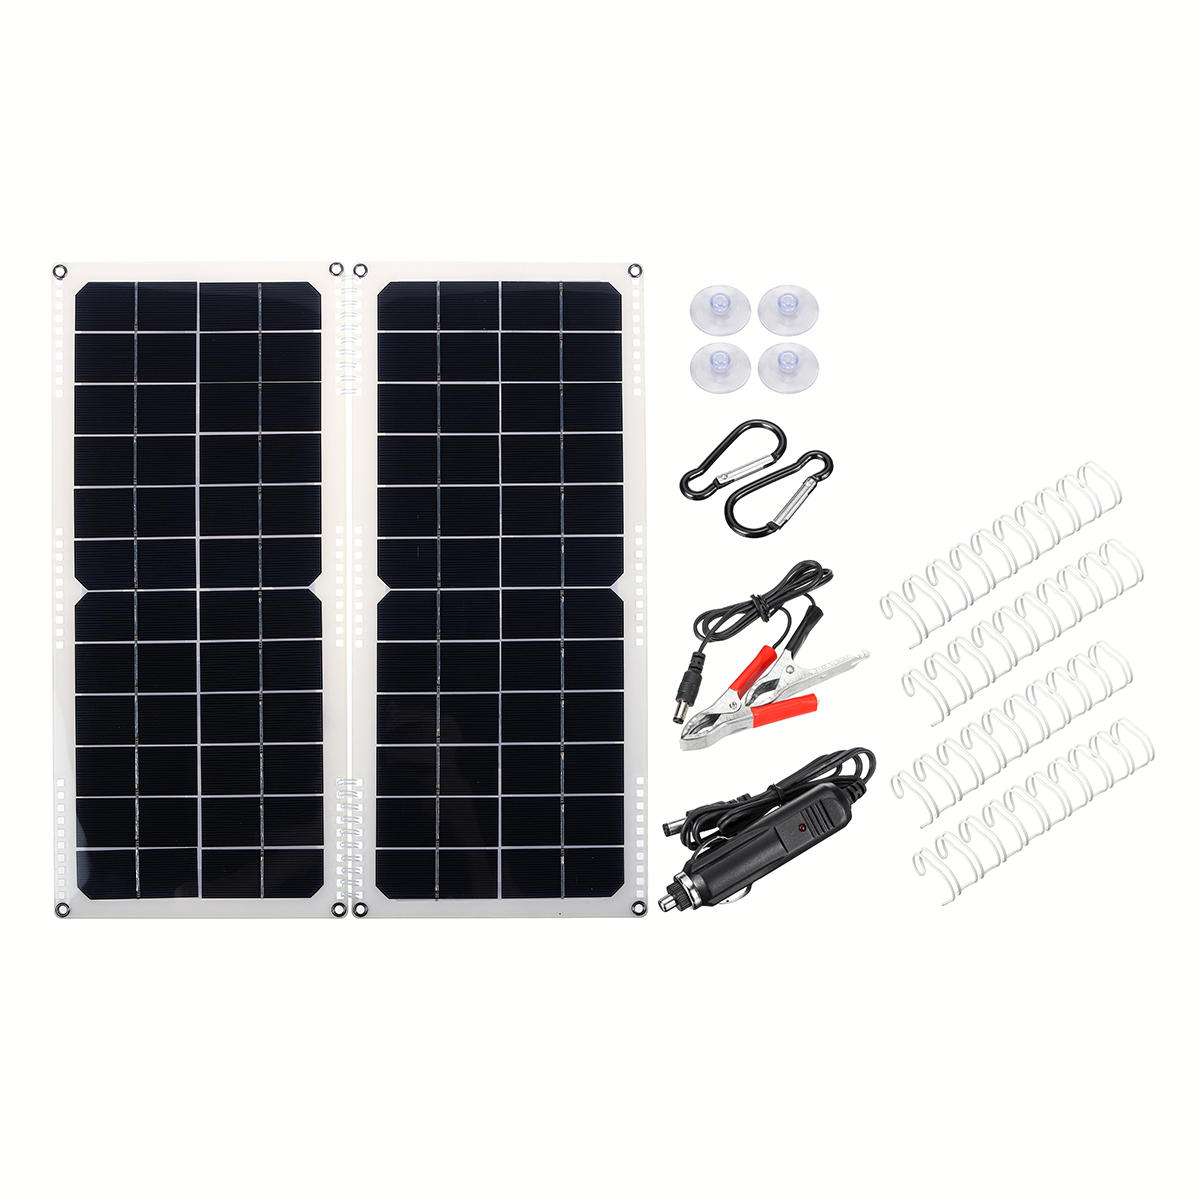 10W 16V 0.9A 420x190x2.5mm Monocrystalline Solar Panel + 4*Spring + Cables Kit with Rear Junction Box Support USB Port